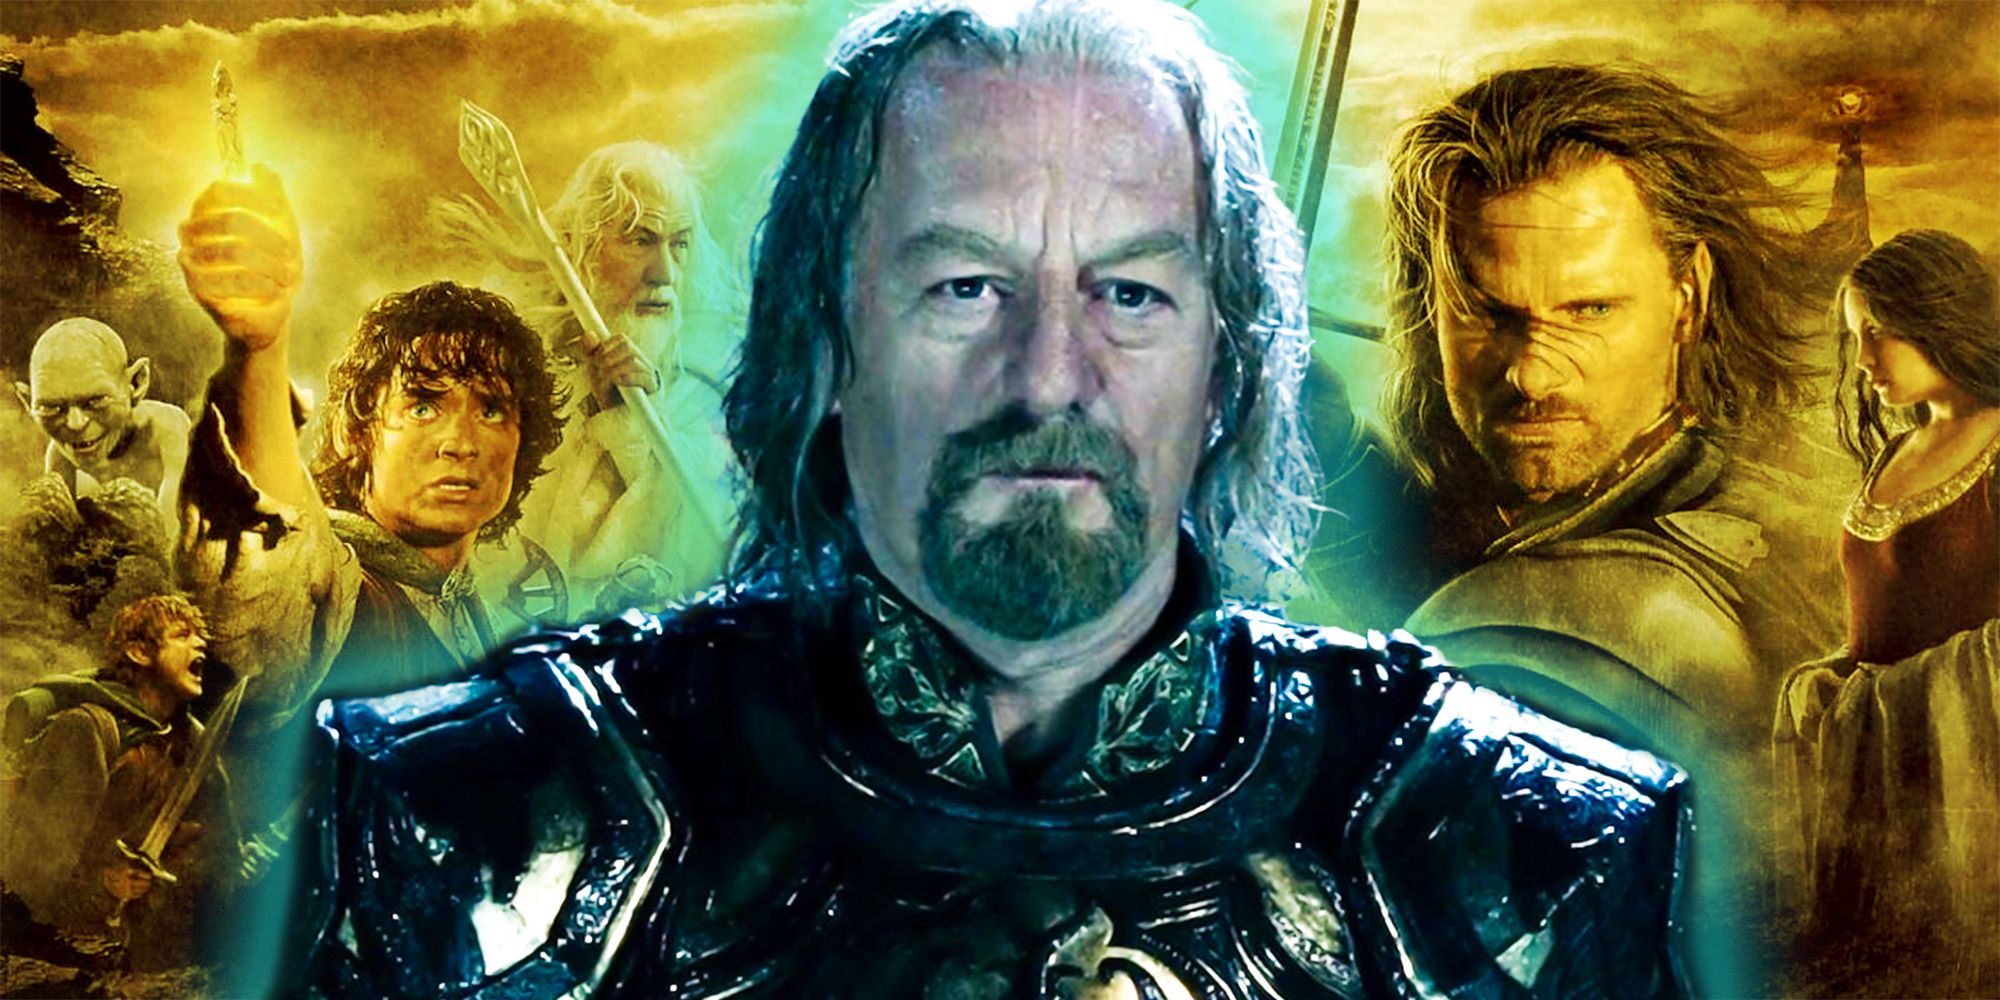 A Lord Of The Rings Anime Movie War Of The Rohirrim Is In The Works